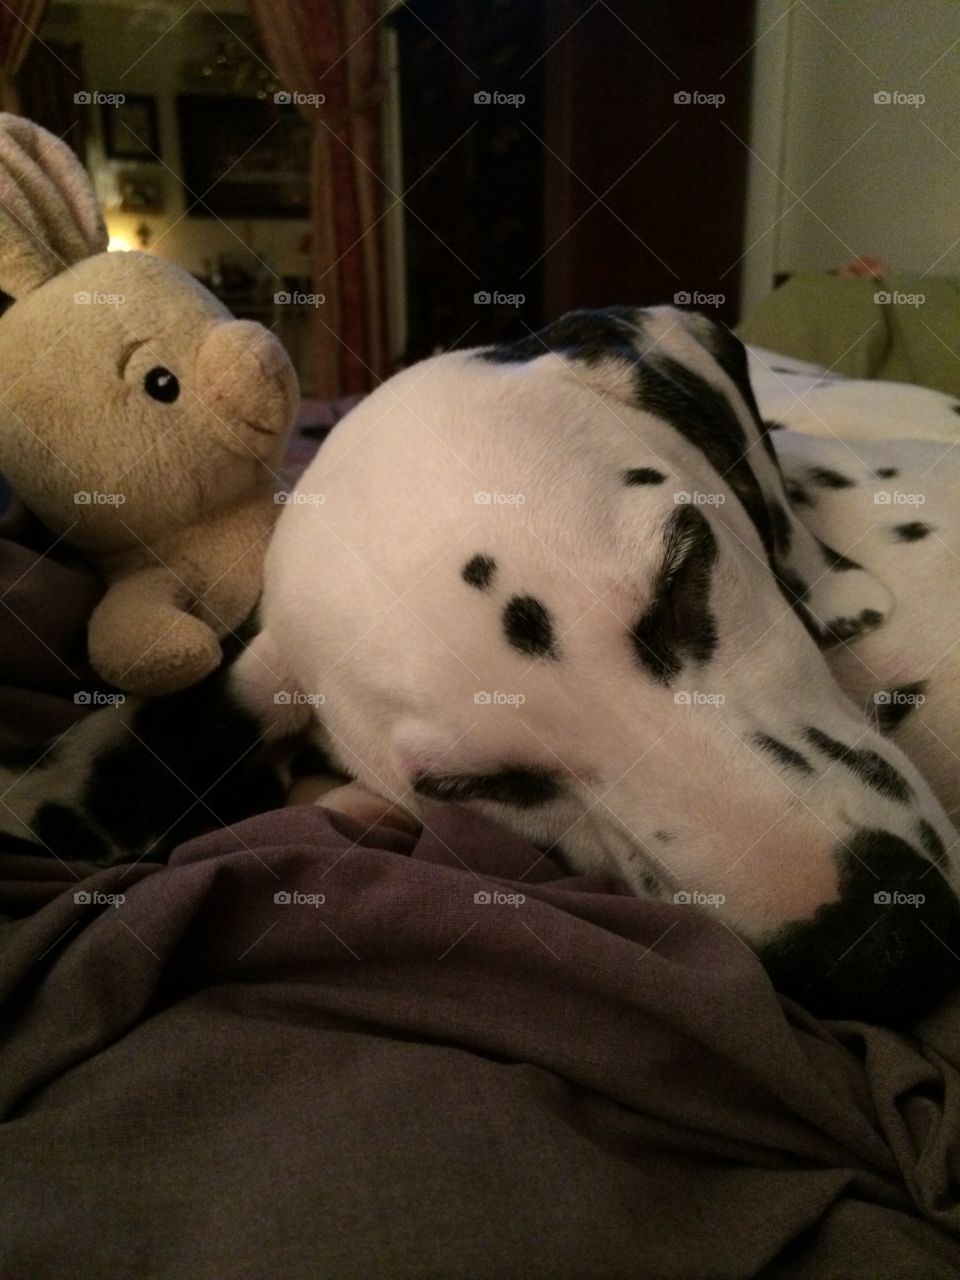 My Dalmatian Puppy Domino😘. My Sweet Dalmatian Puppy Domino Chiefy  sleeping with his Favorite Baby Monkey❤️